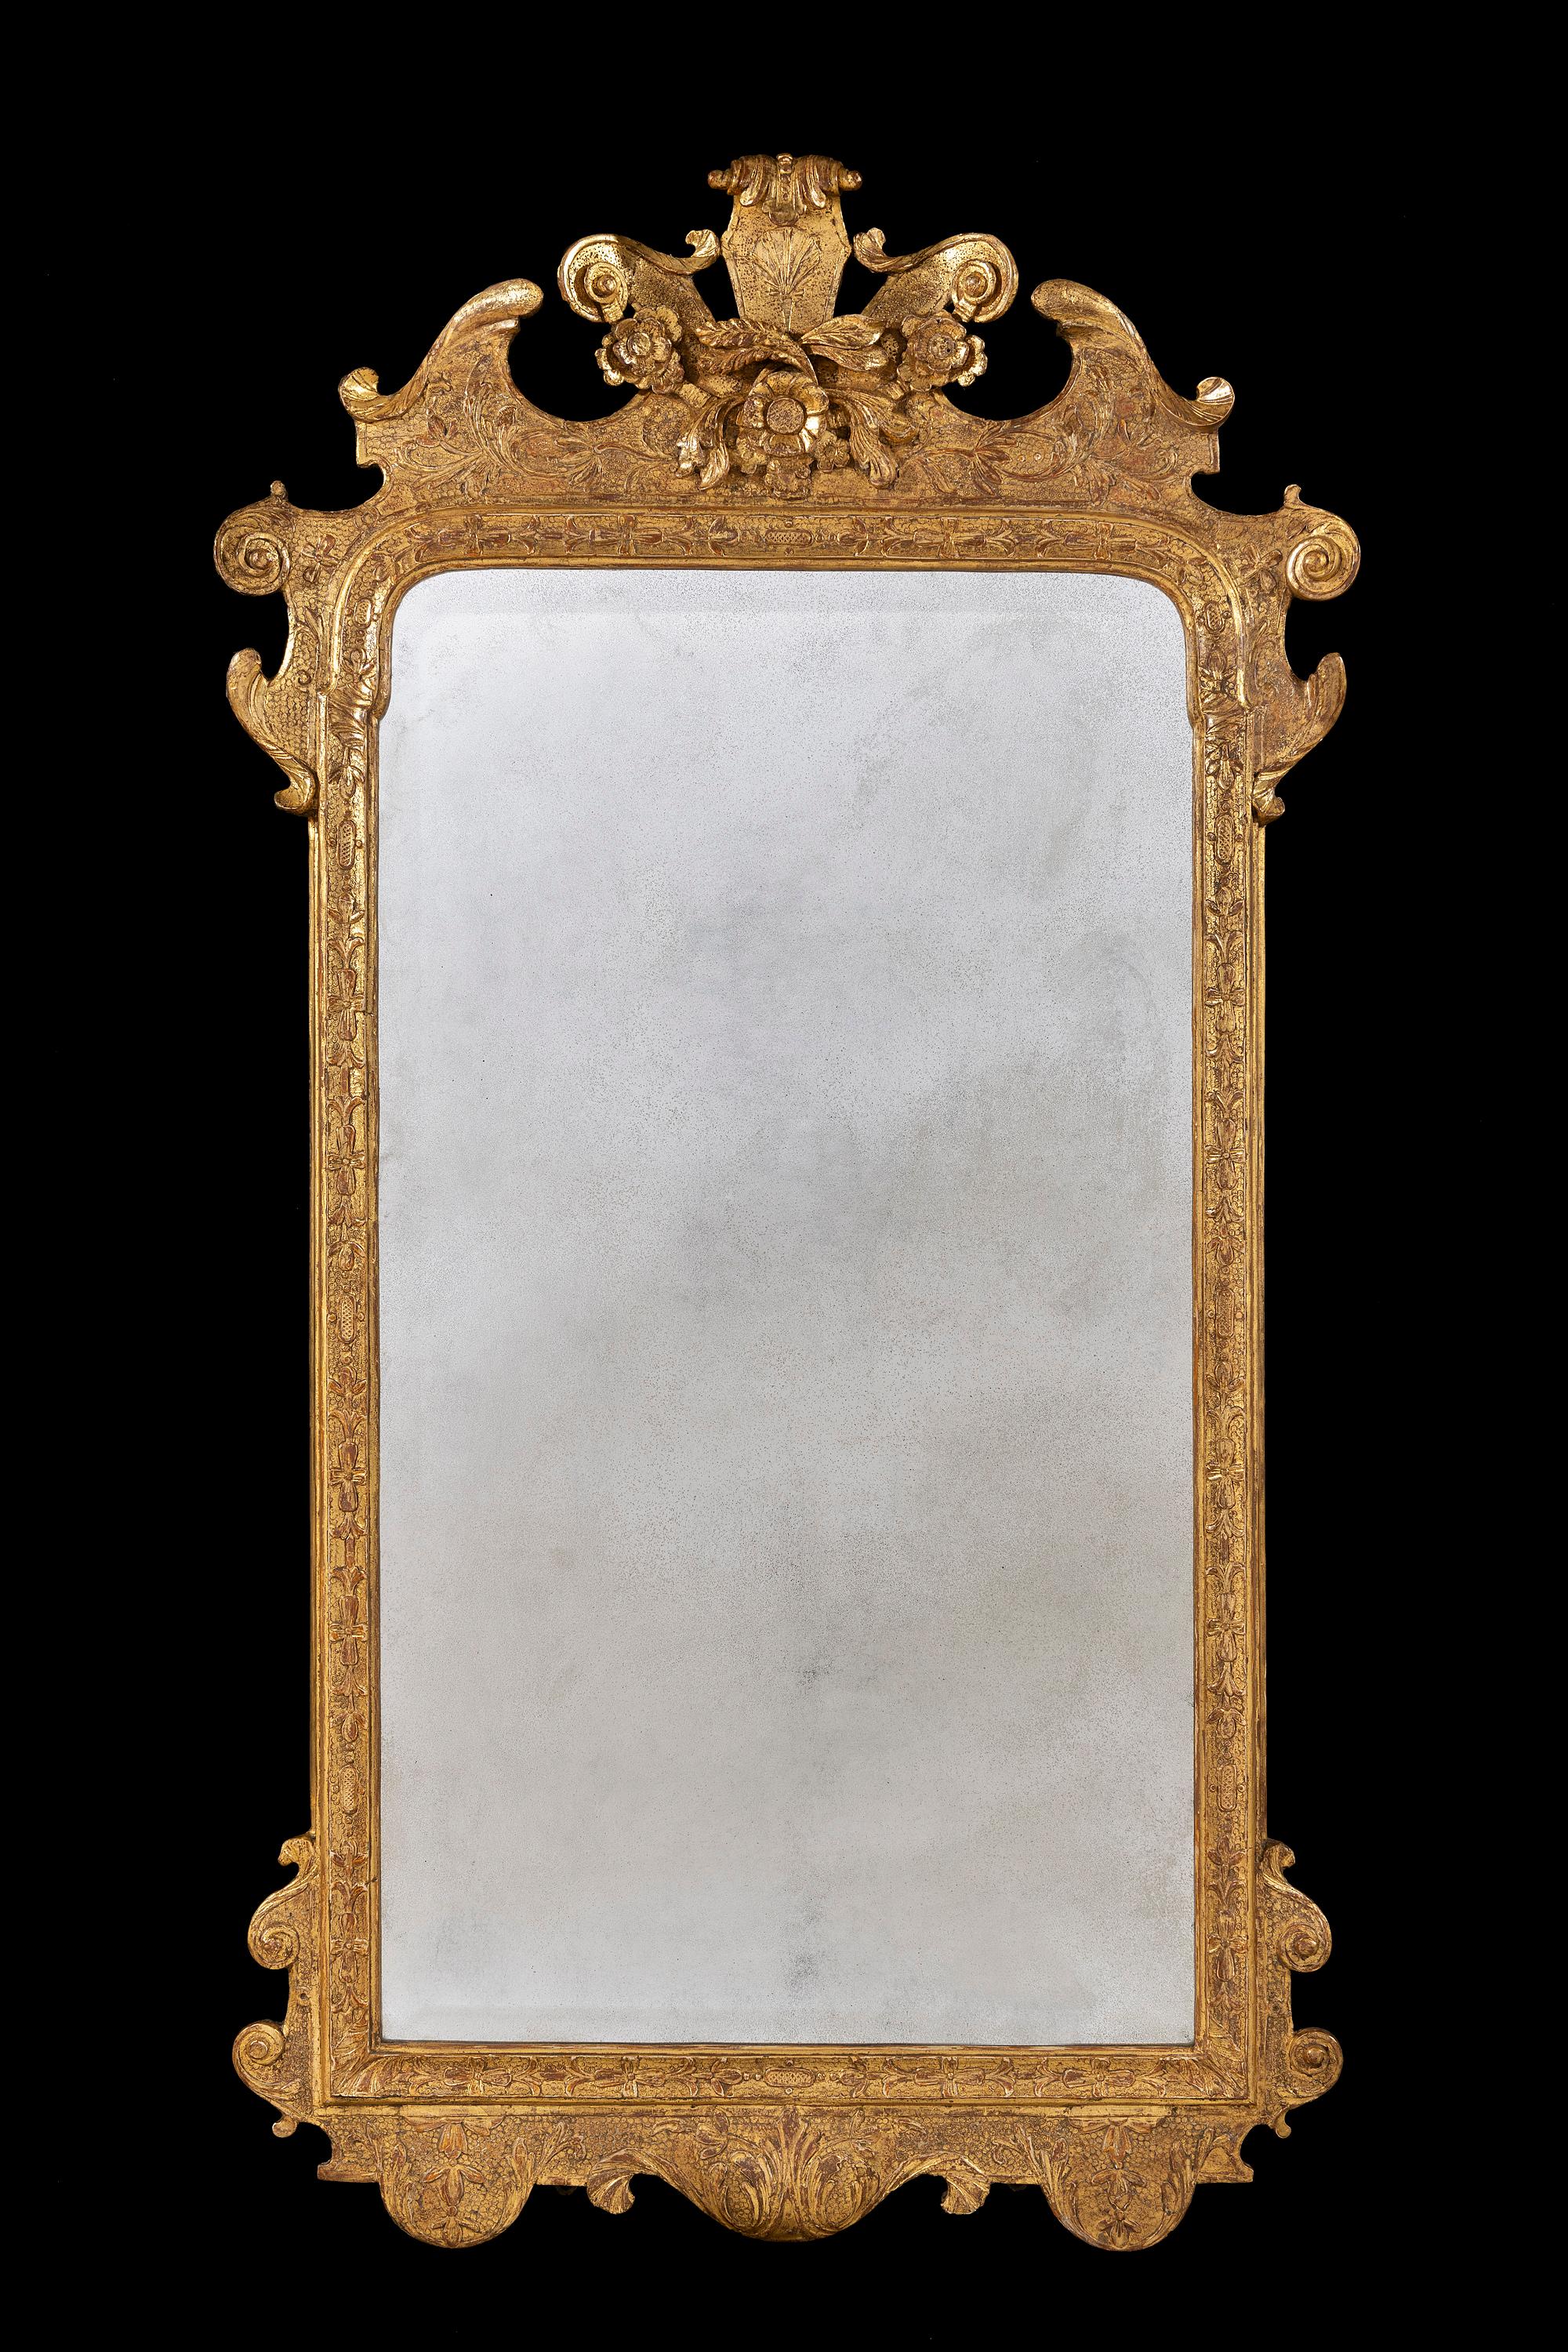 Early 18th Century Early George I Period 18th Century Carved Gesso Mirror For Sale